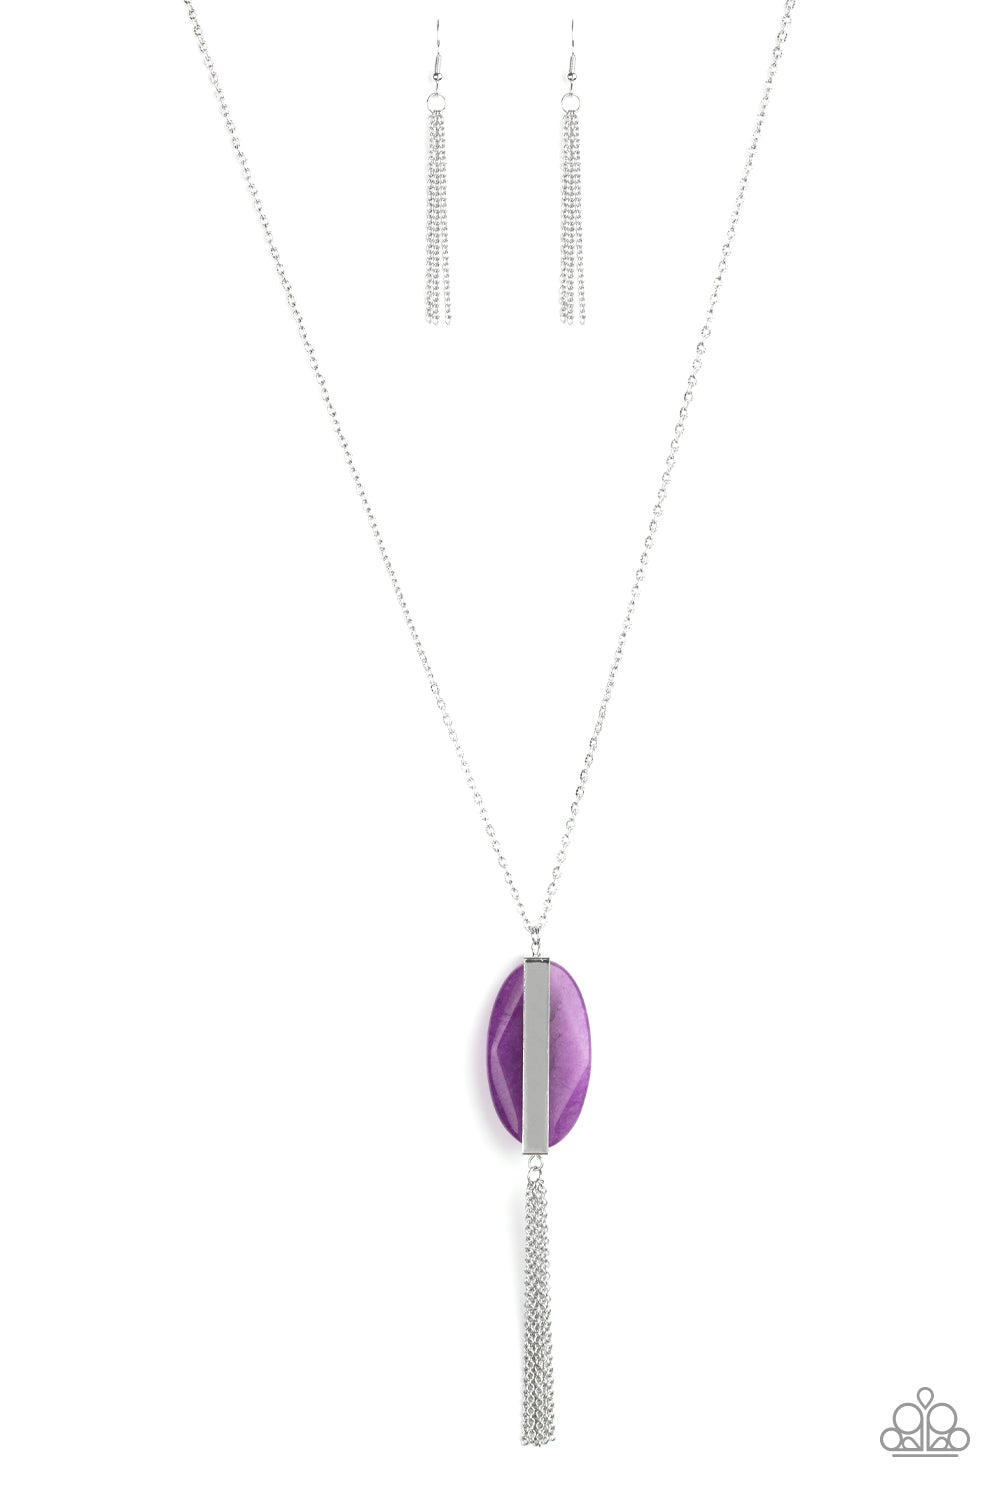 Paparazzi Accessories - Tranquility Trend - Purple Necklace - Alies Bling Bar